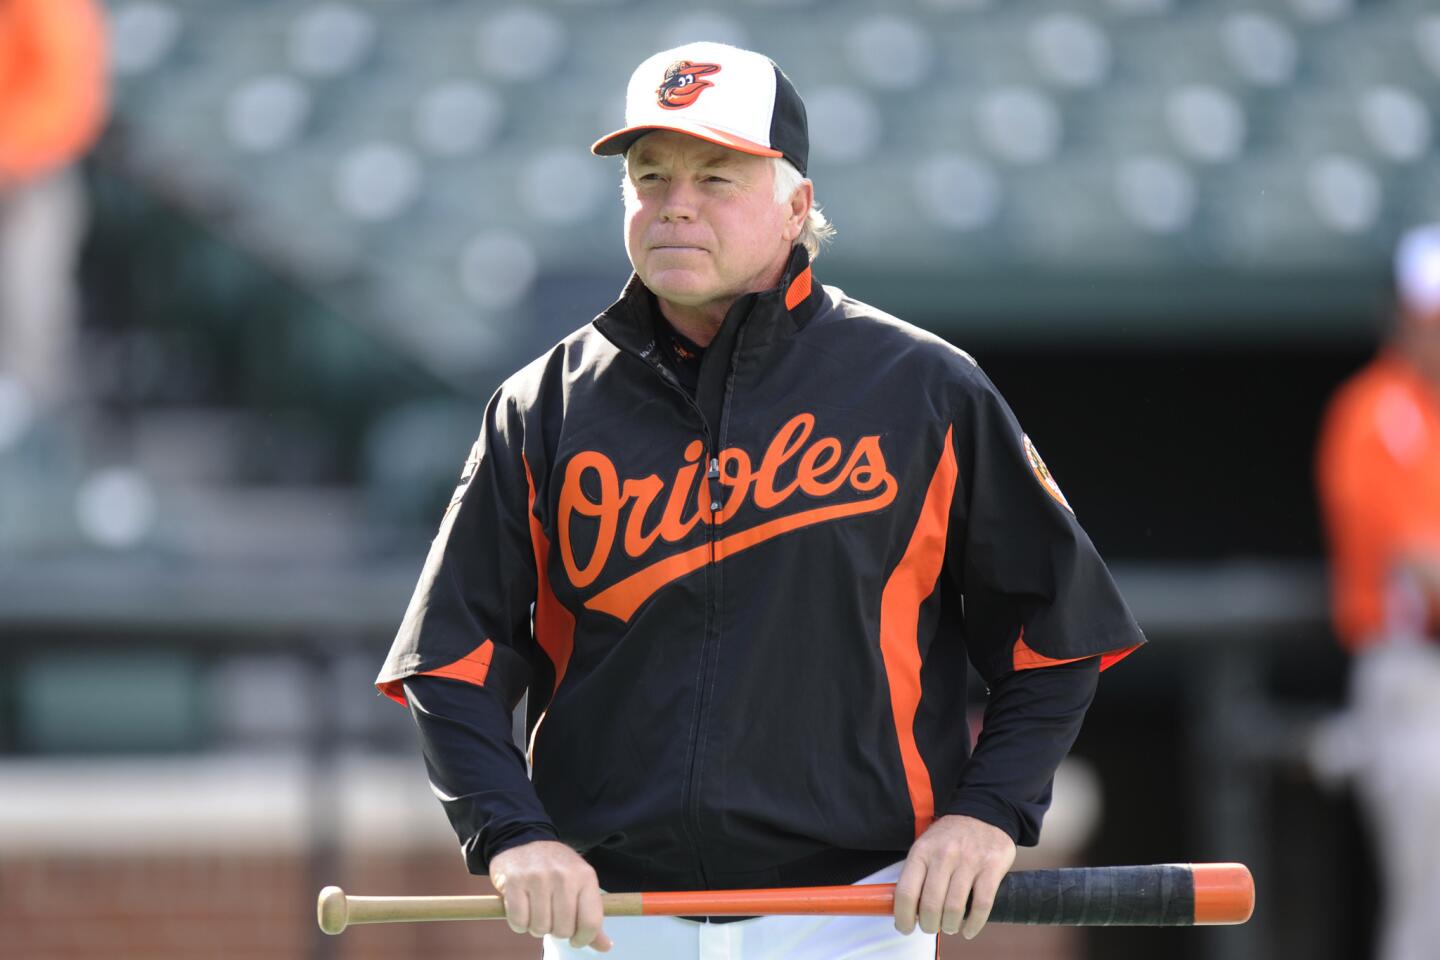 The Orioles brought in Buck Showalter knowing his history of developing young teams and helping them become contenders. From his track record with the New York Yankees and Arizona Diamondbacks, Showalter usually takes two years to turn around a team. Sure, people around Baltimore were plenty disappointed seeing the 2011 Orioles go 69-93 after Showalter came in late in the 2010 season to lead the Birds to a 34-23 record. But hey, it's his second full year with the O's, and the proof is in the pudding.